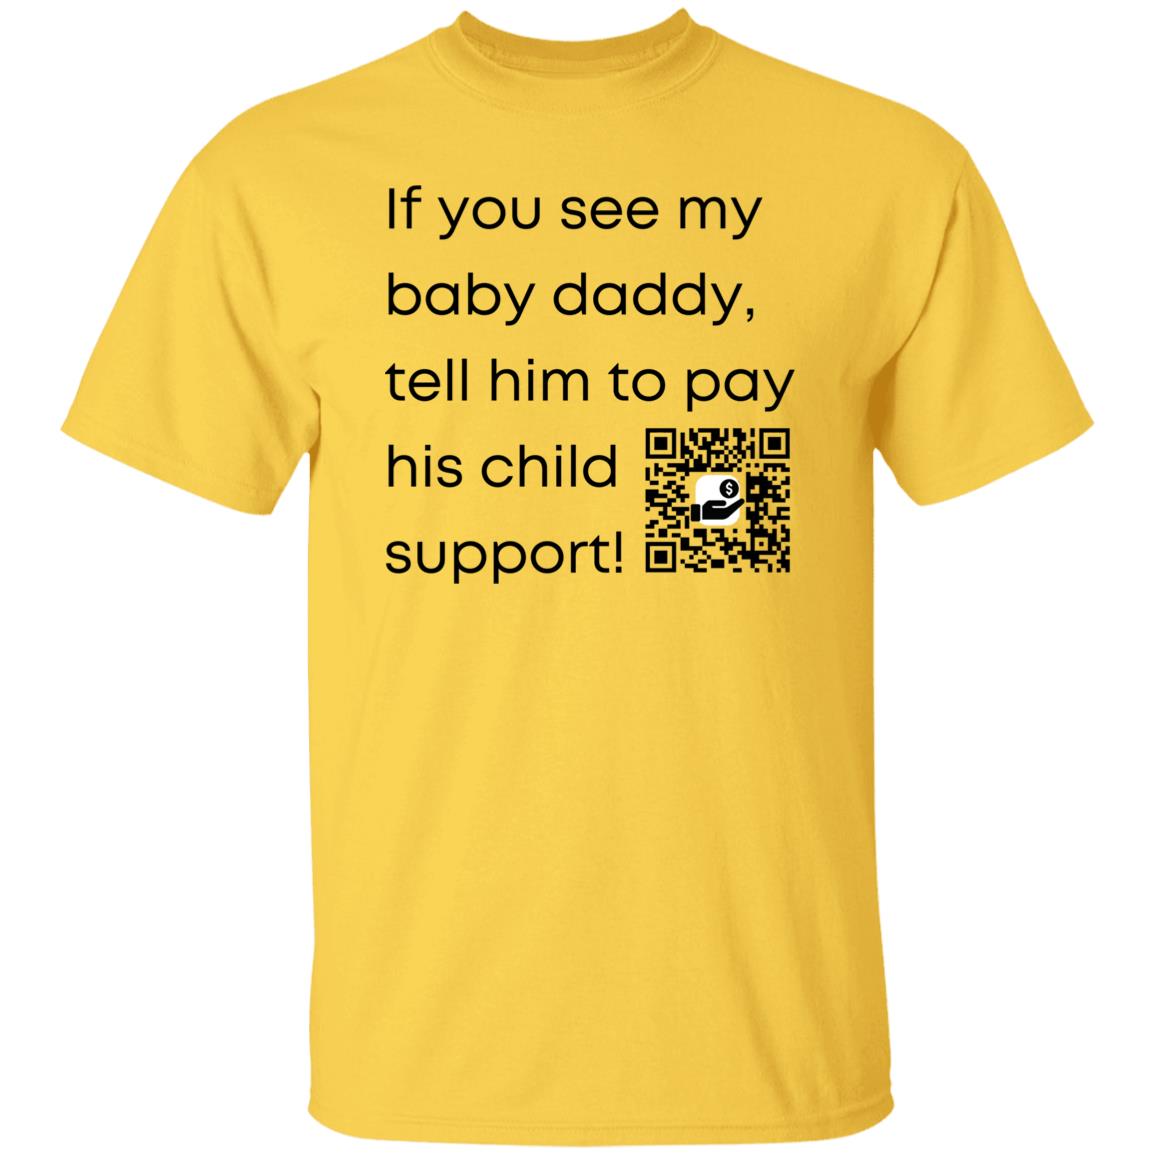 Pay Child Support (baby daddy) G500 5.3 oz. T-Shirt